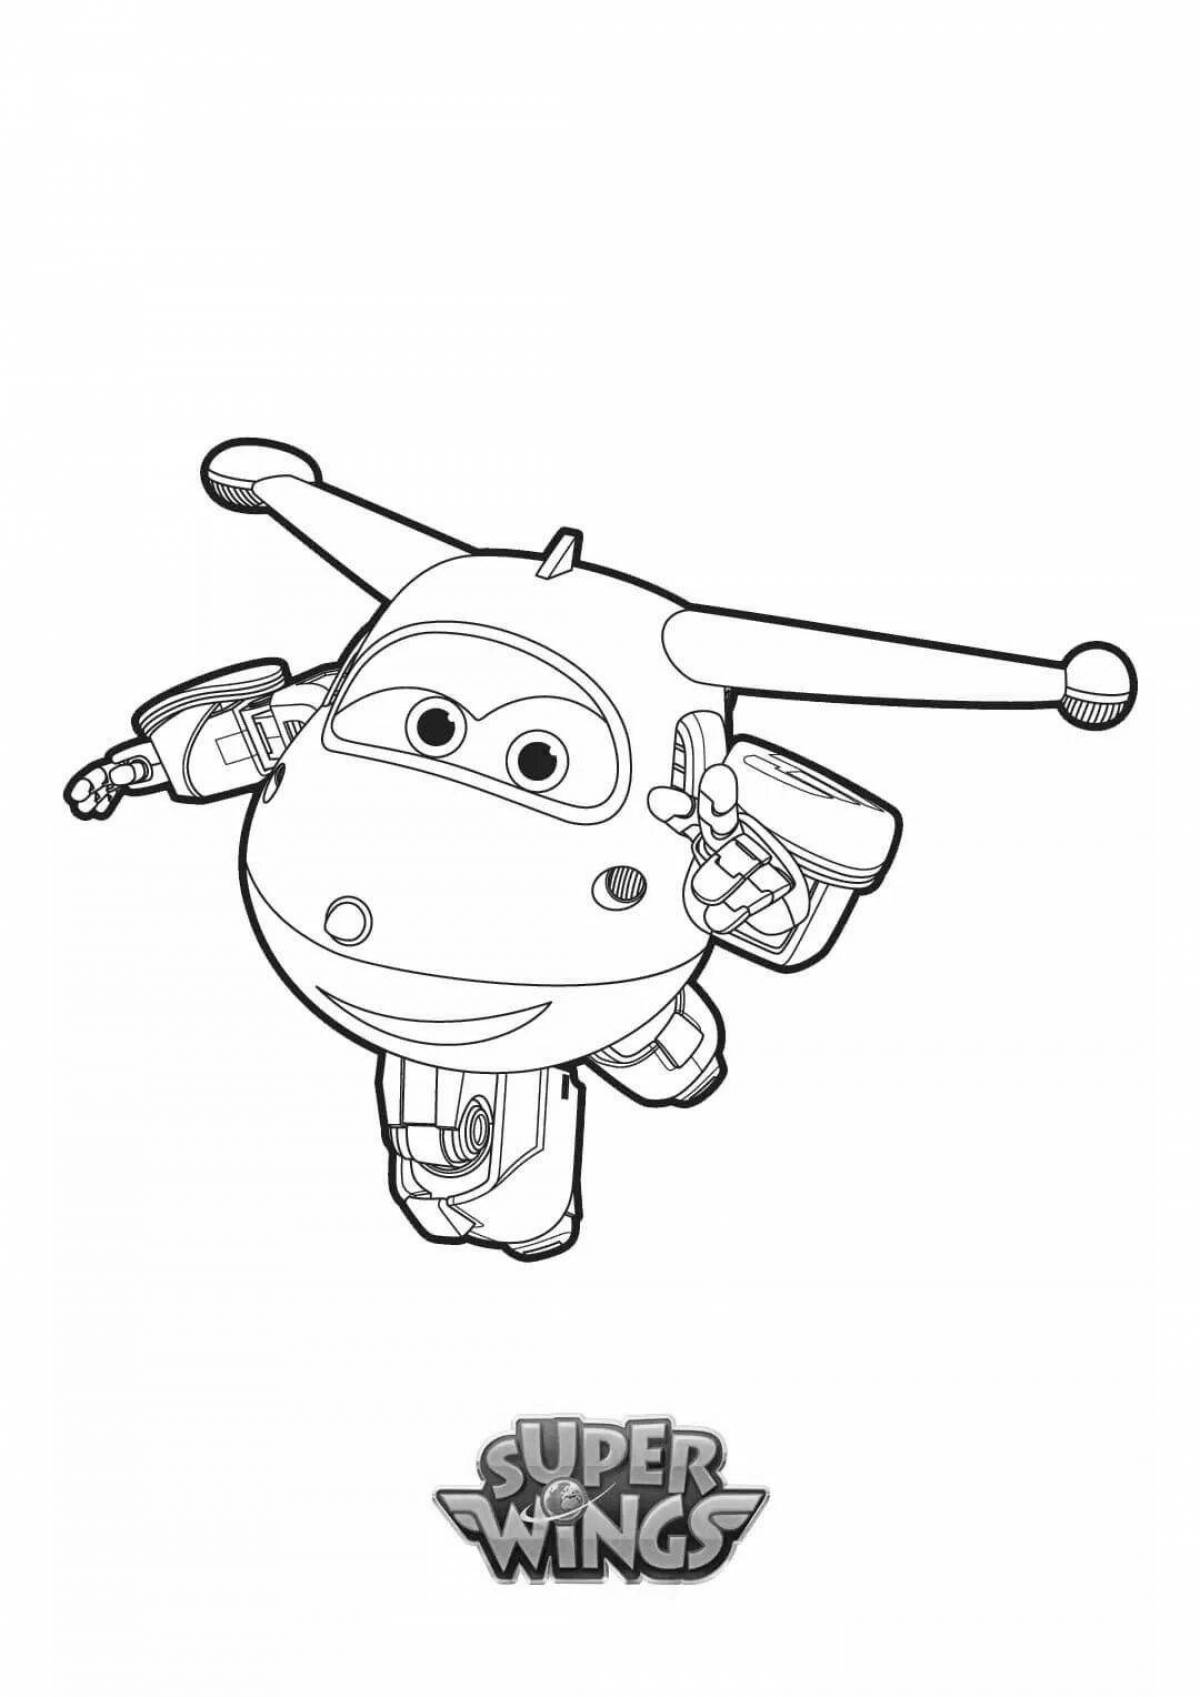 Crystal Super Wings Coloring Page